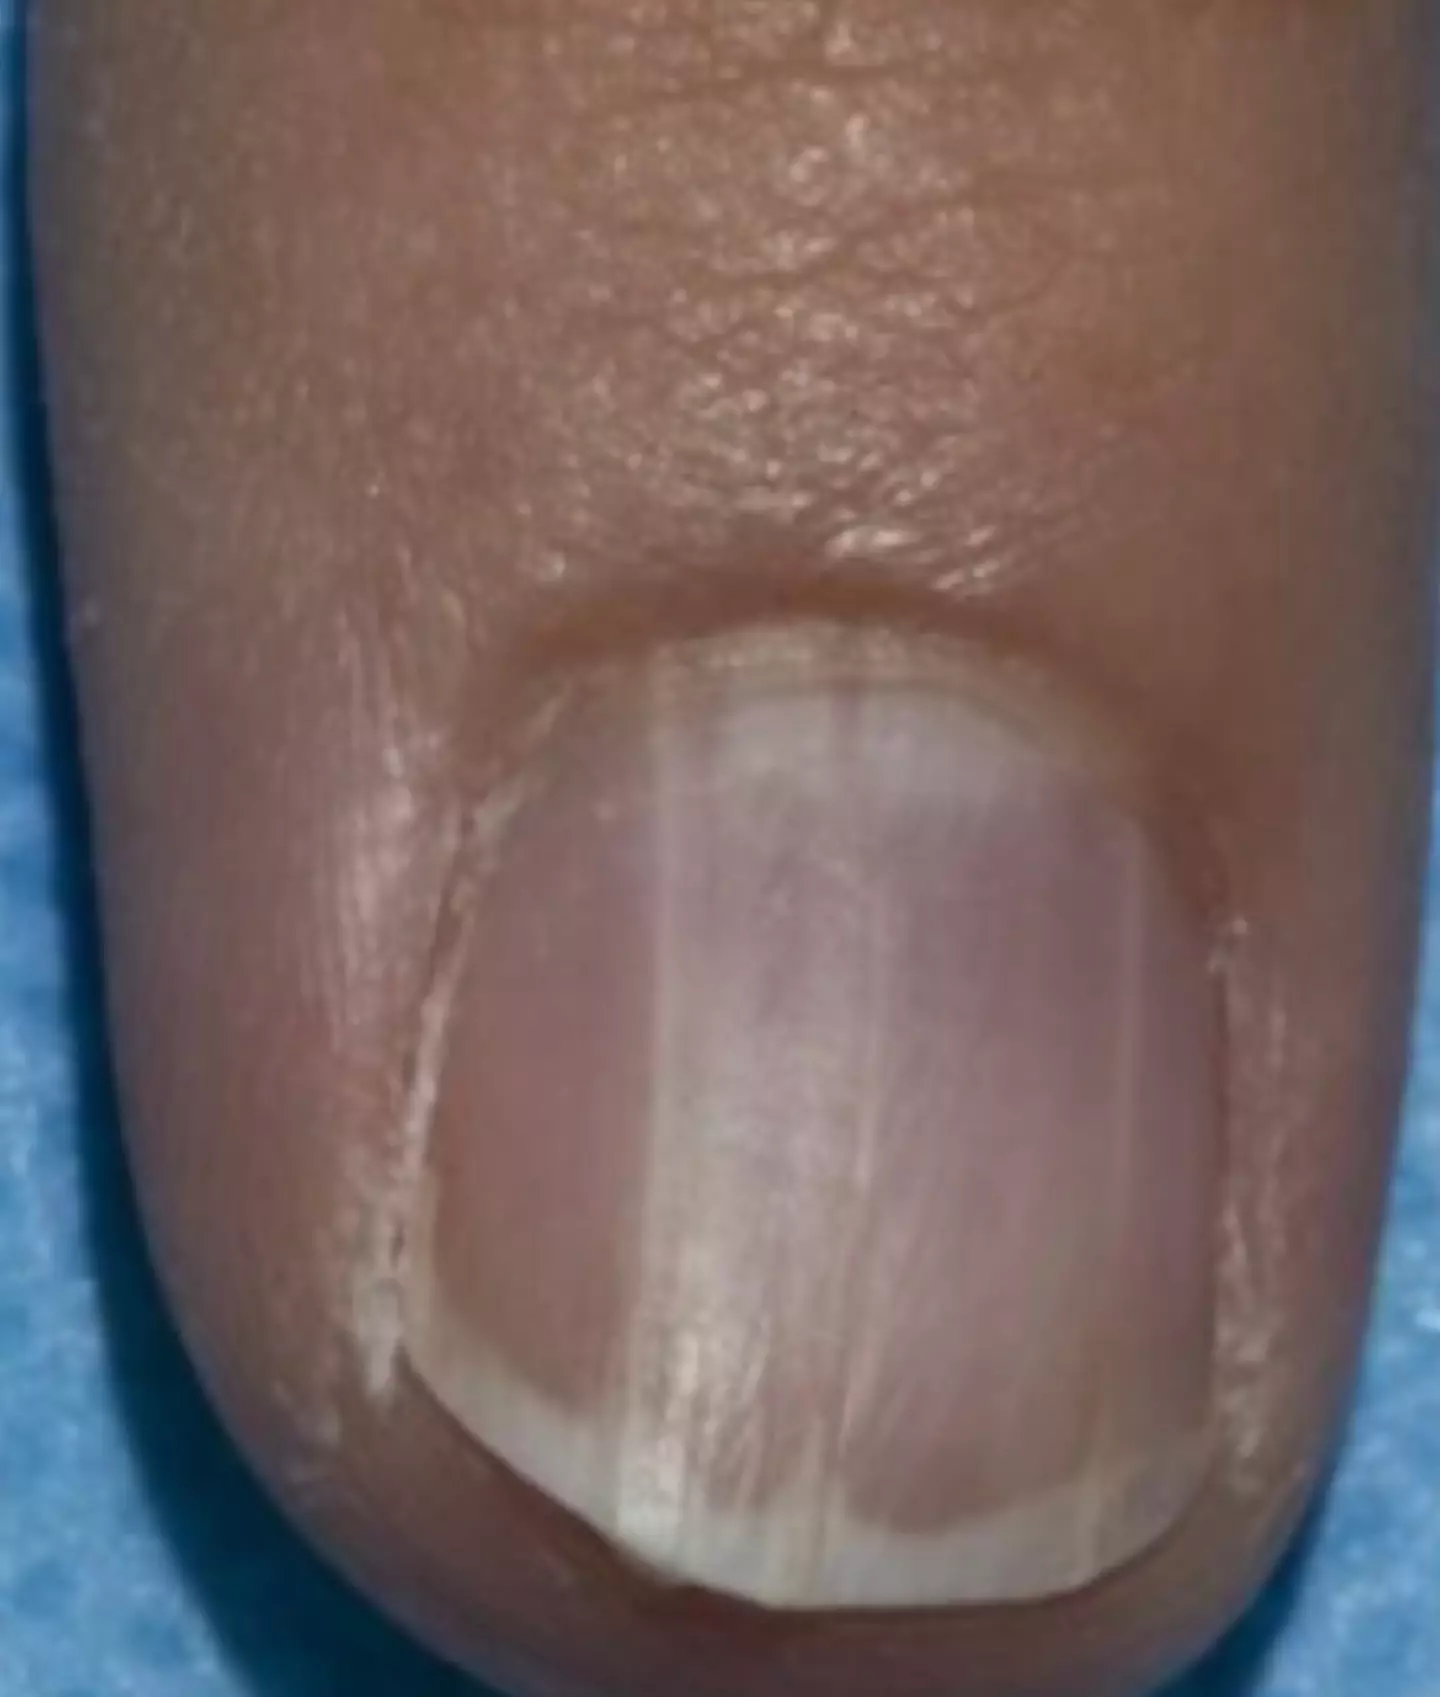 The condition is only likely to affect one nail. (Dermatology Consultation Service)